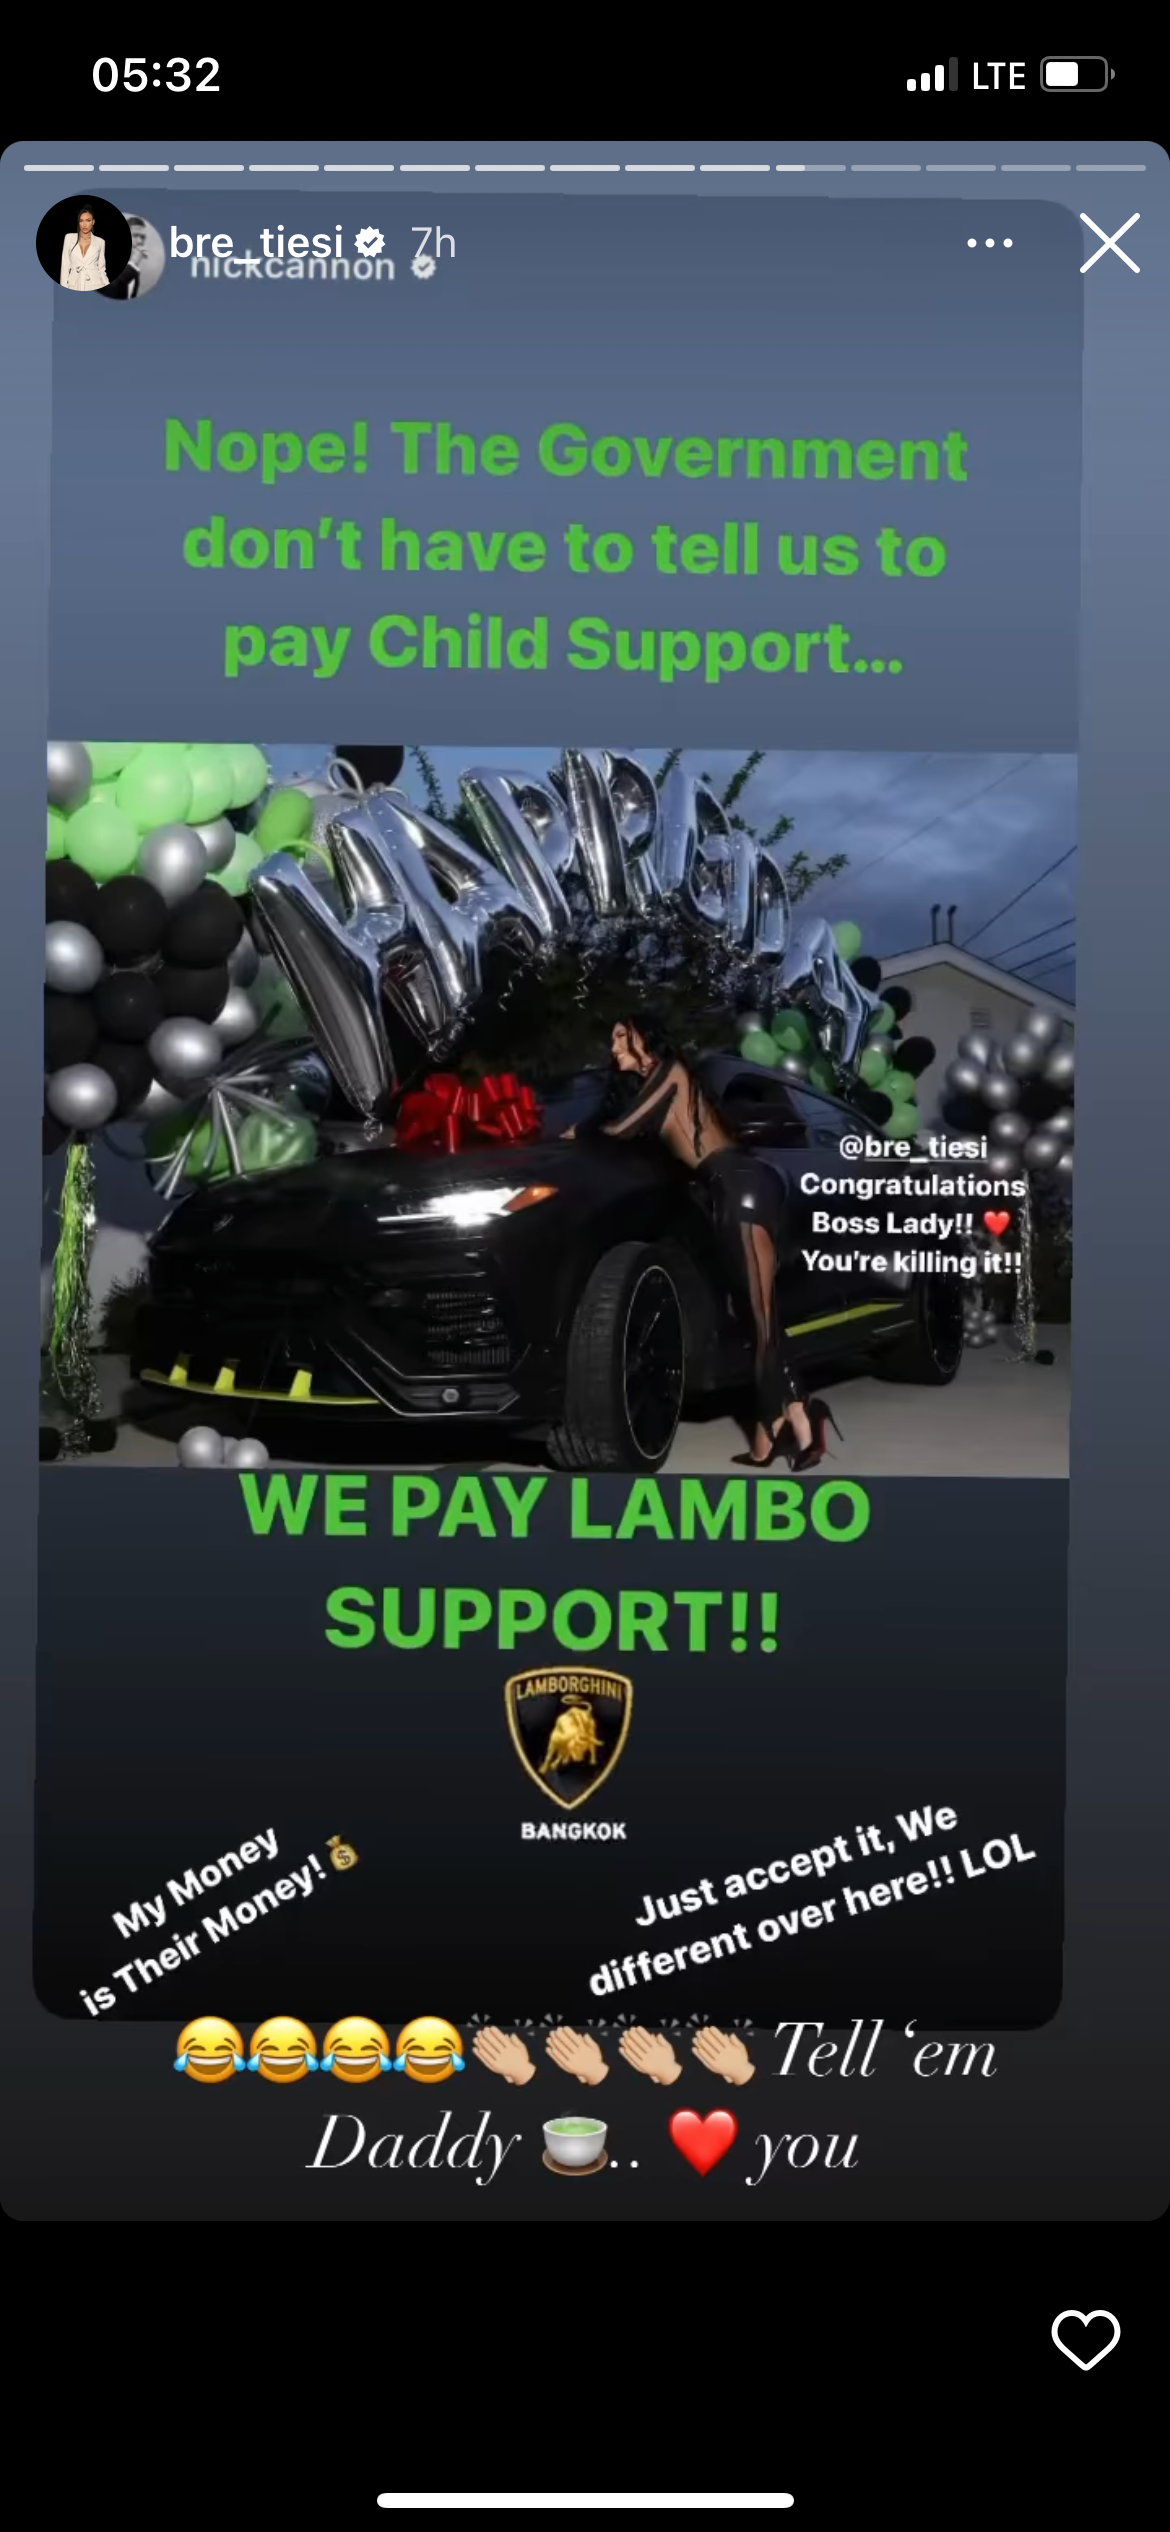 Nick Cannon says he pays Lambo support